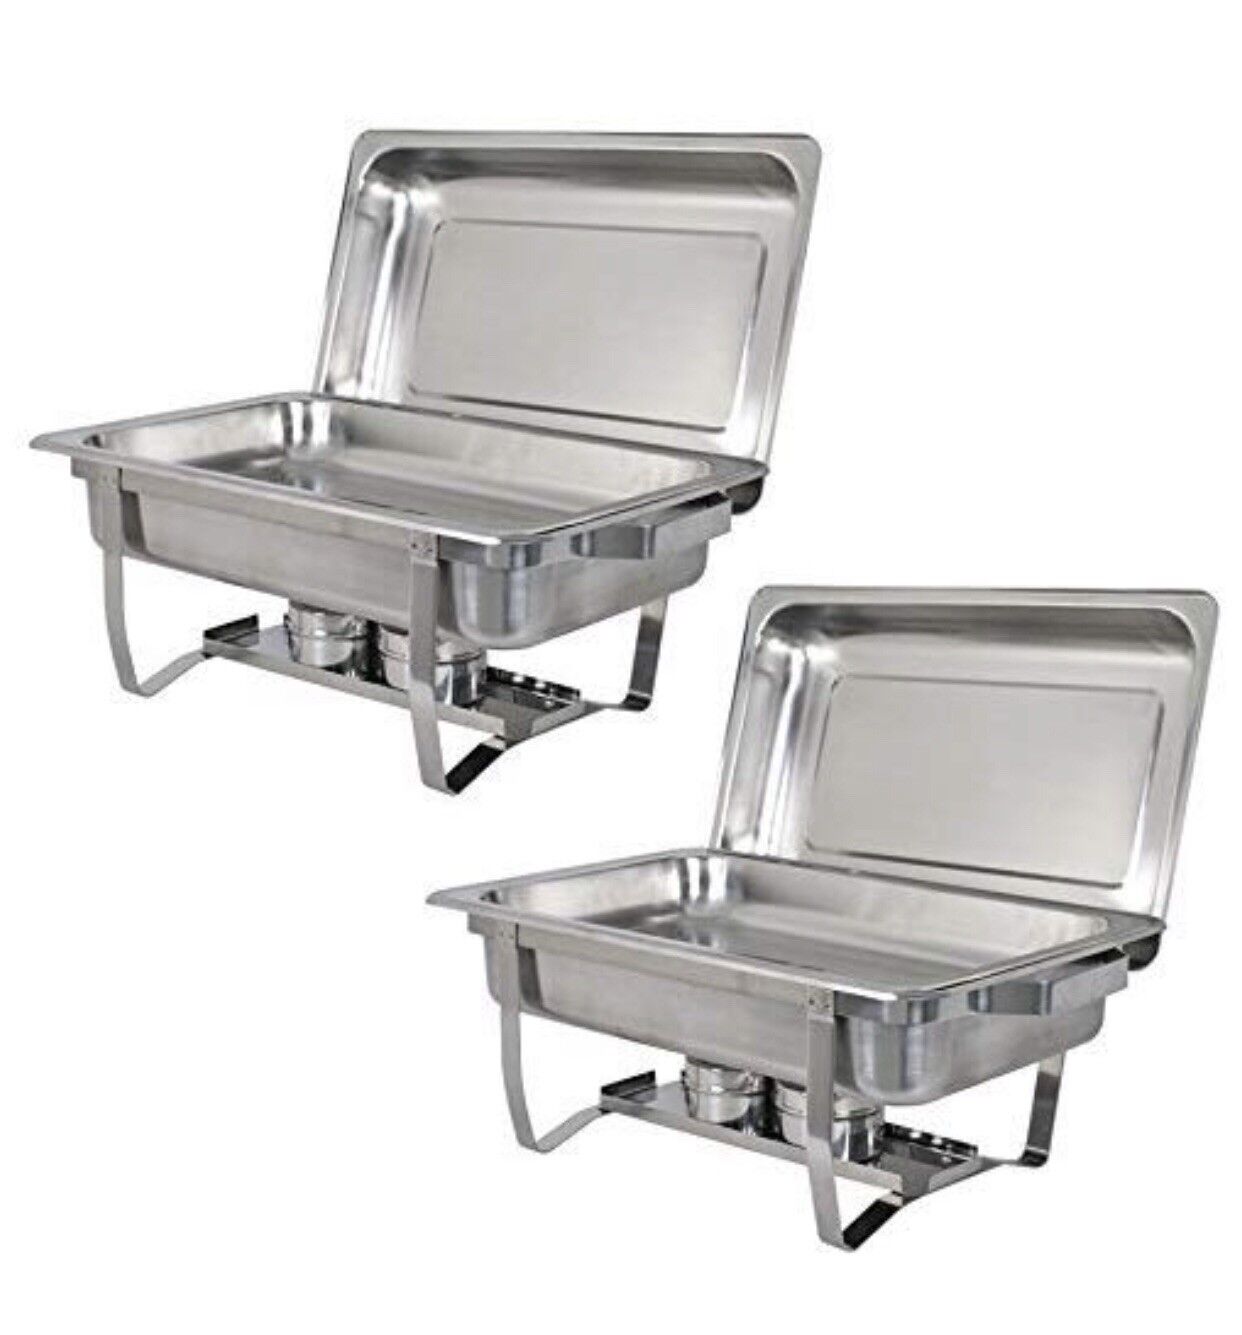 Stainless Steel CHAFER DISH - 8 QT Full Size Buffet Catering Party - 4 pack